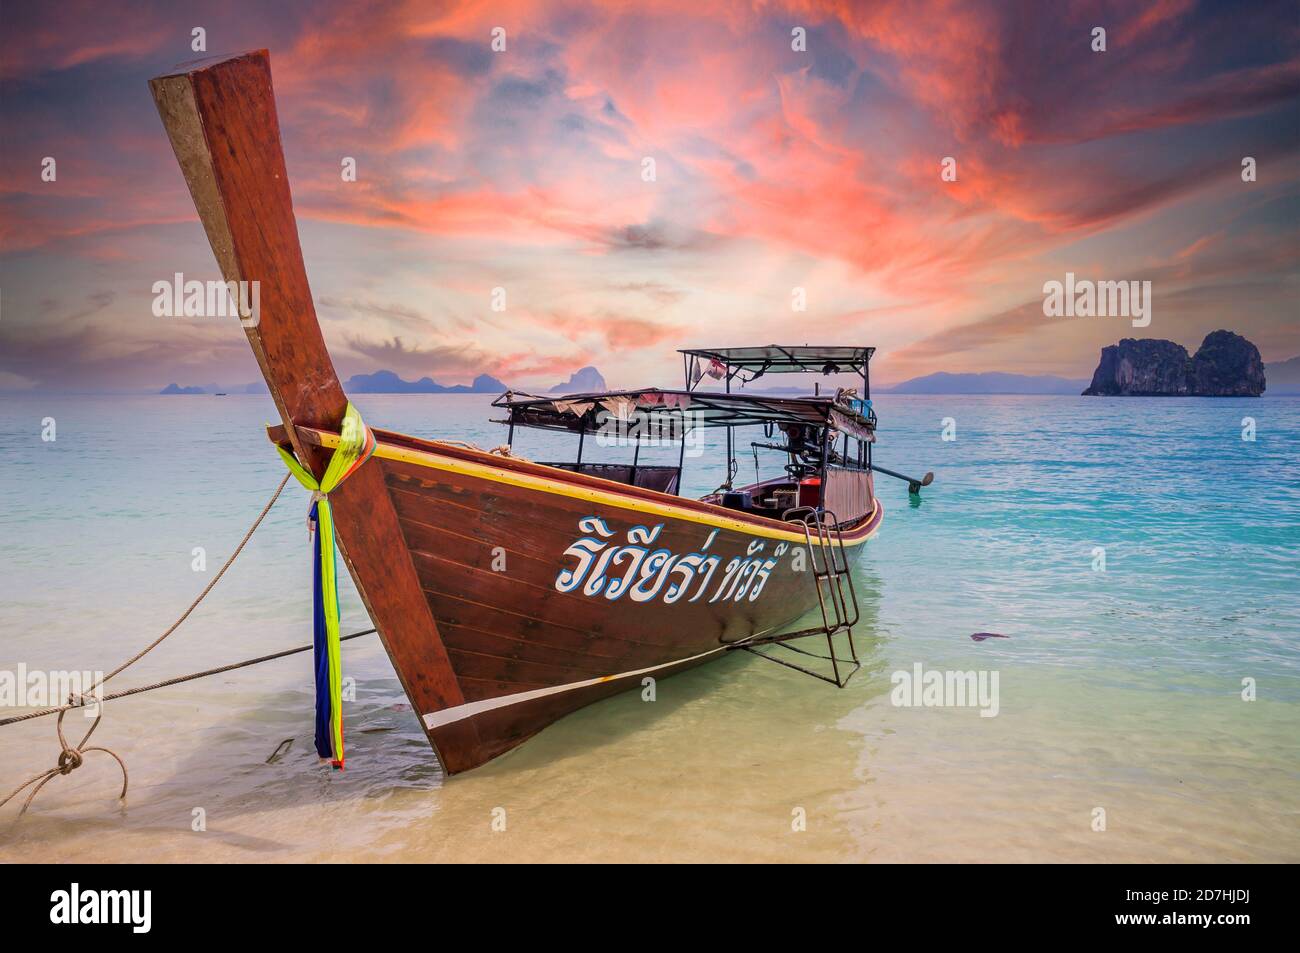 Amazing sunset over longtail boat on beach in Thailand Stock Photo